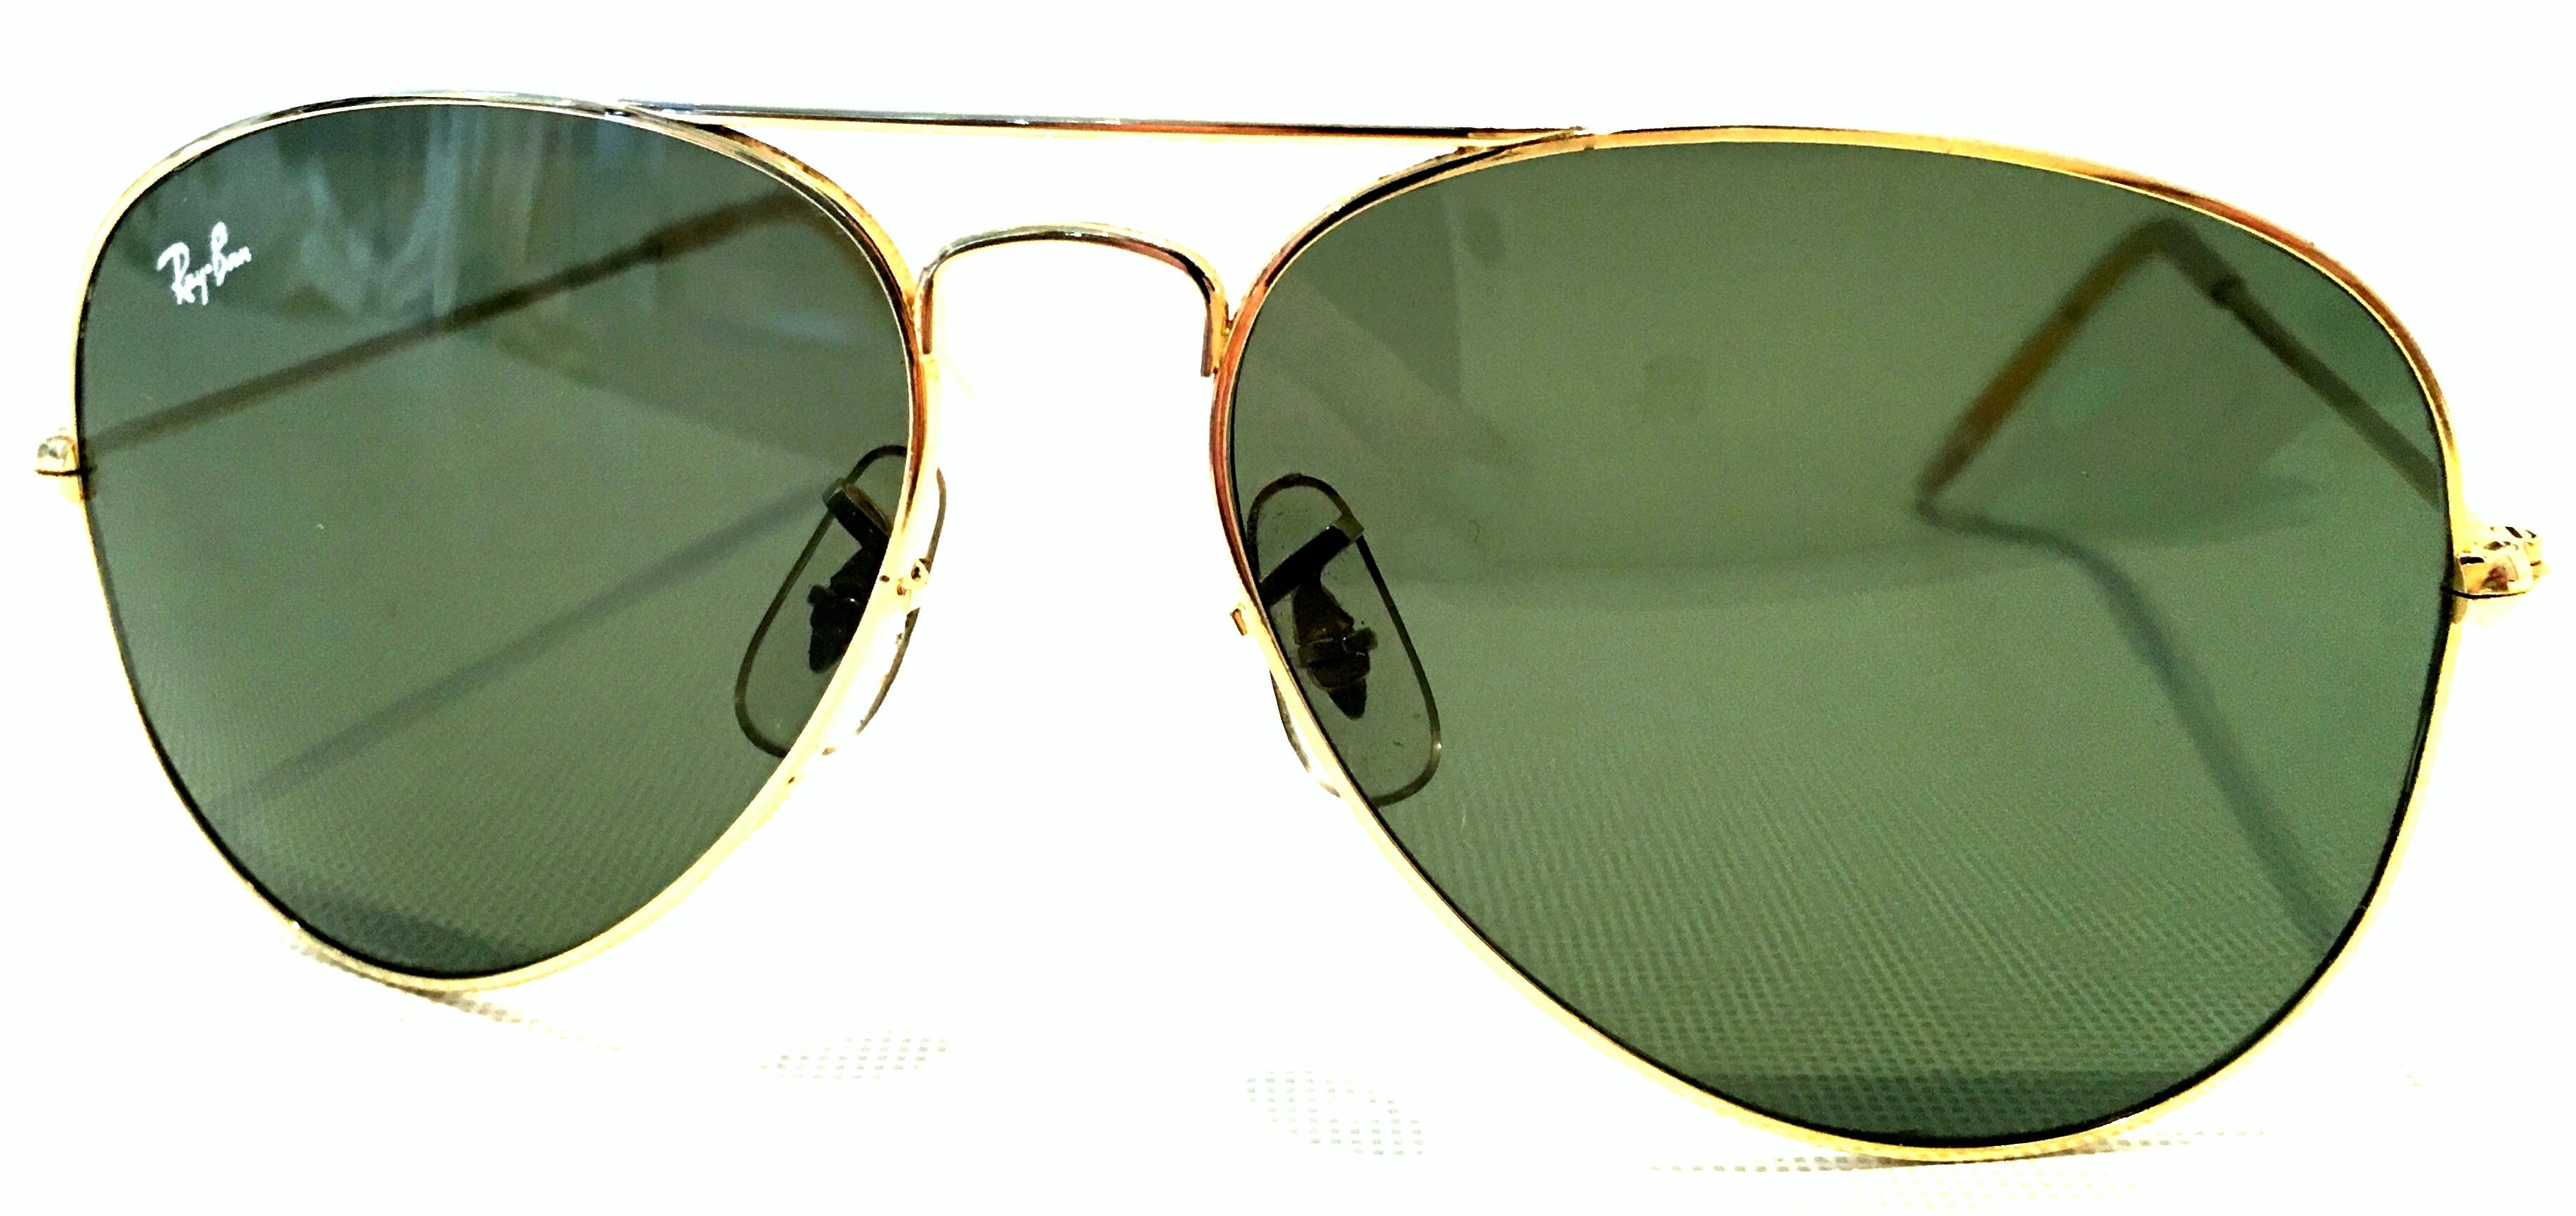 1980'S Gold Plate Tear Drop Aviator Sunglasses & Case By, Bausch & Lomb Ray Ban USA. These classic and timeless tear drop shape aviator sunglasses feature, gold plate frame with military green/gray lens. The tear drop shaped lenses are